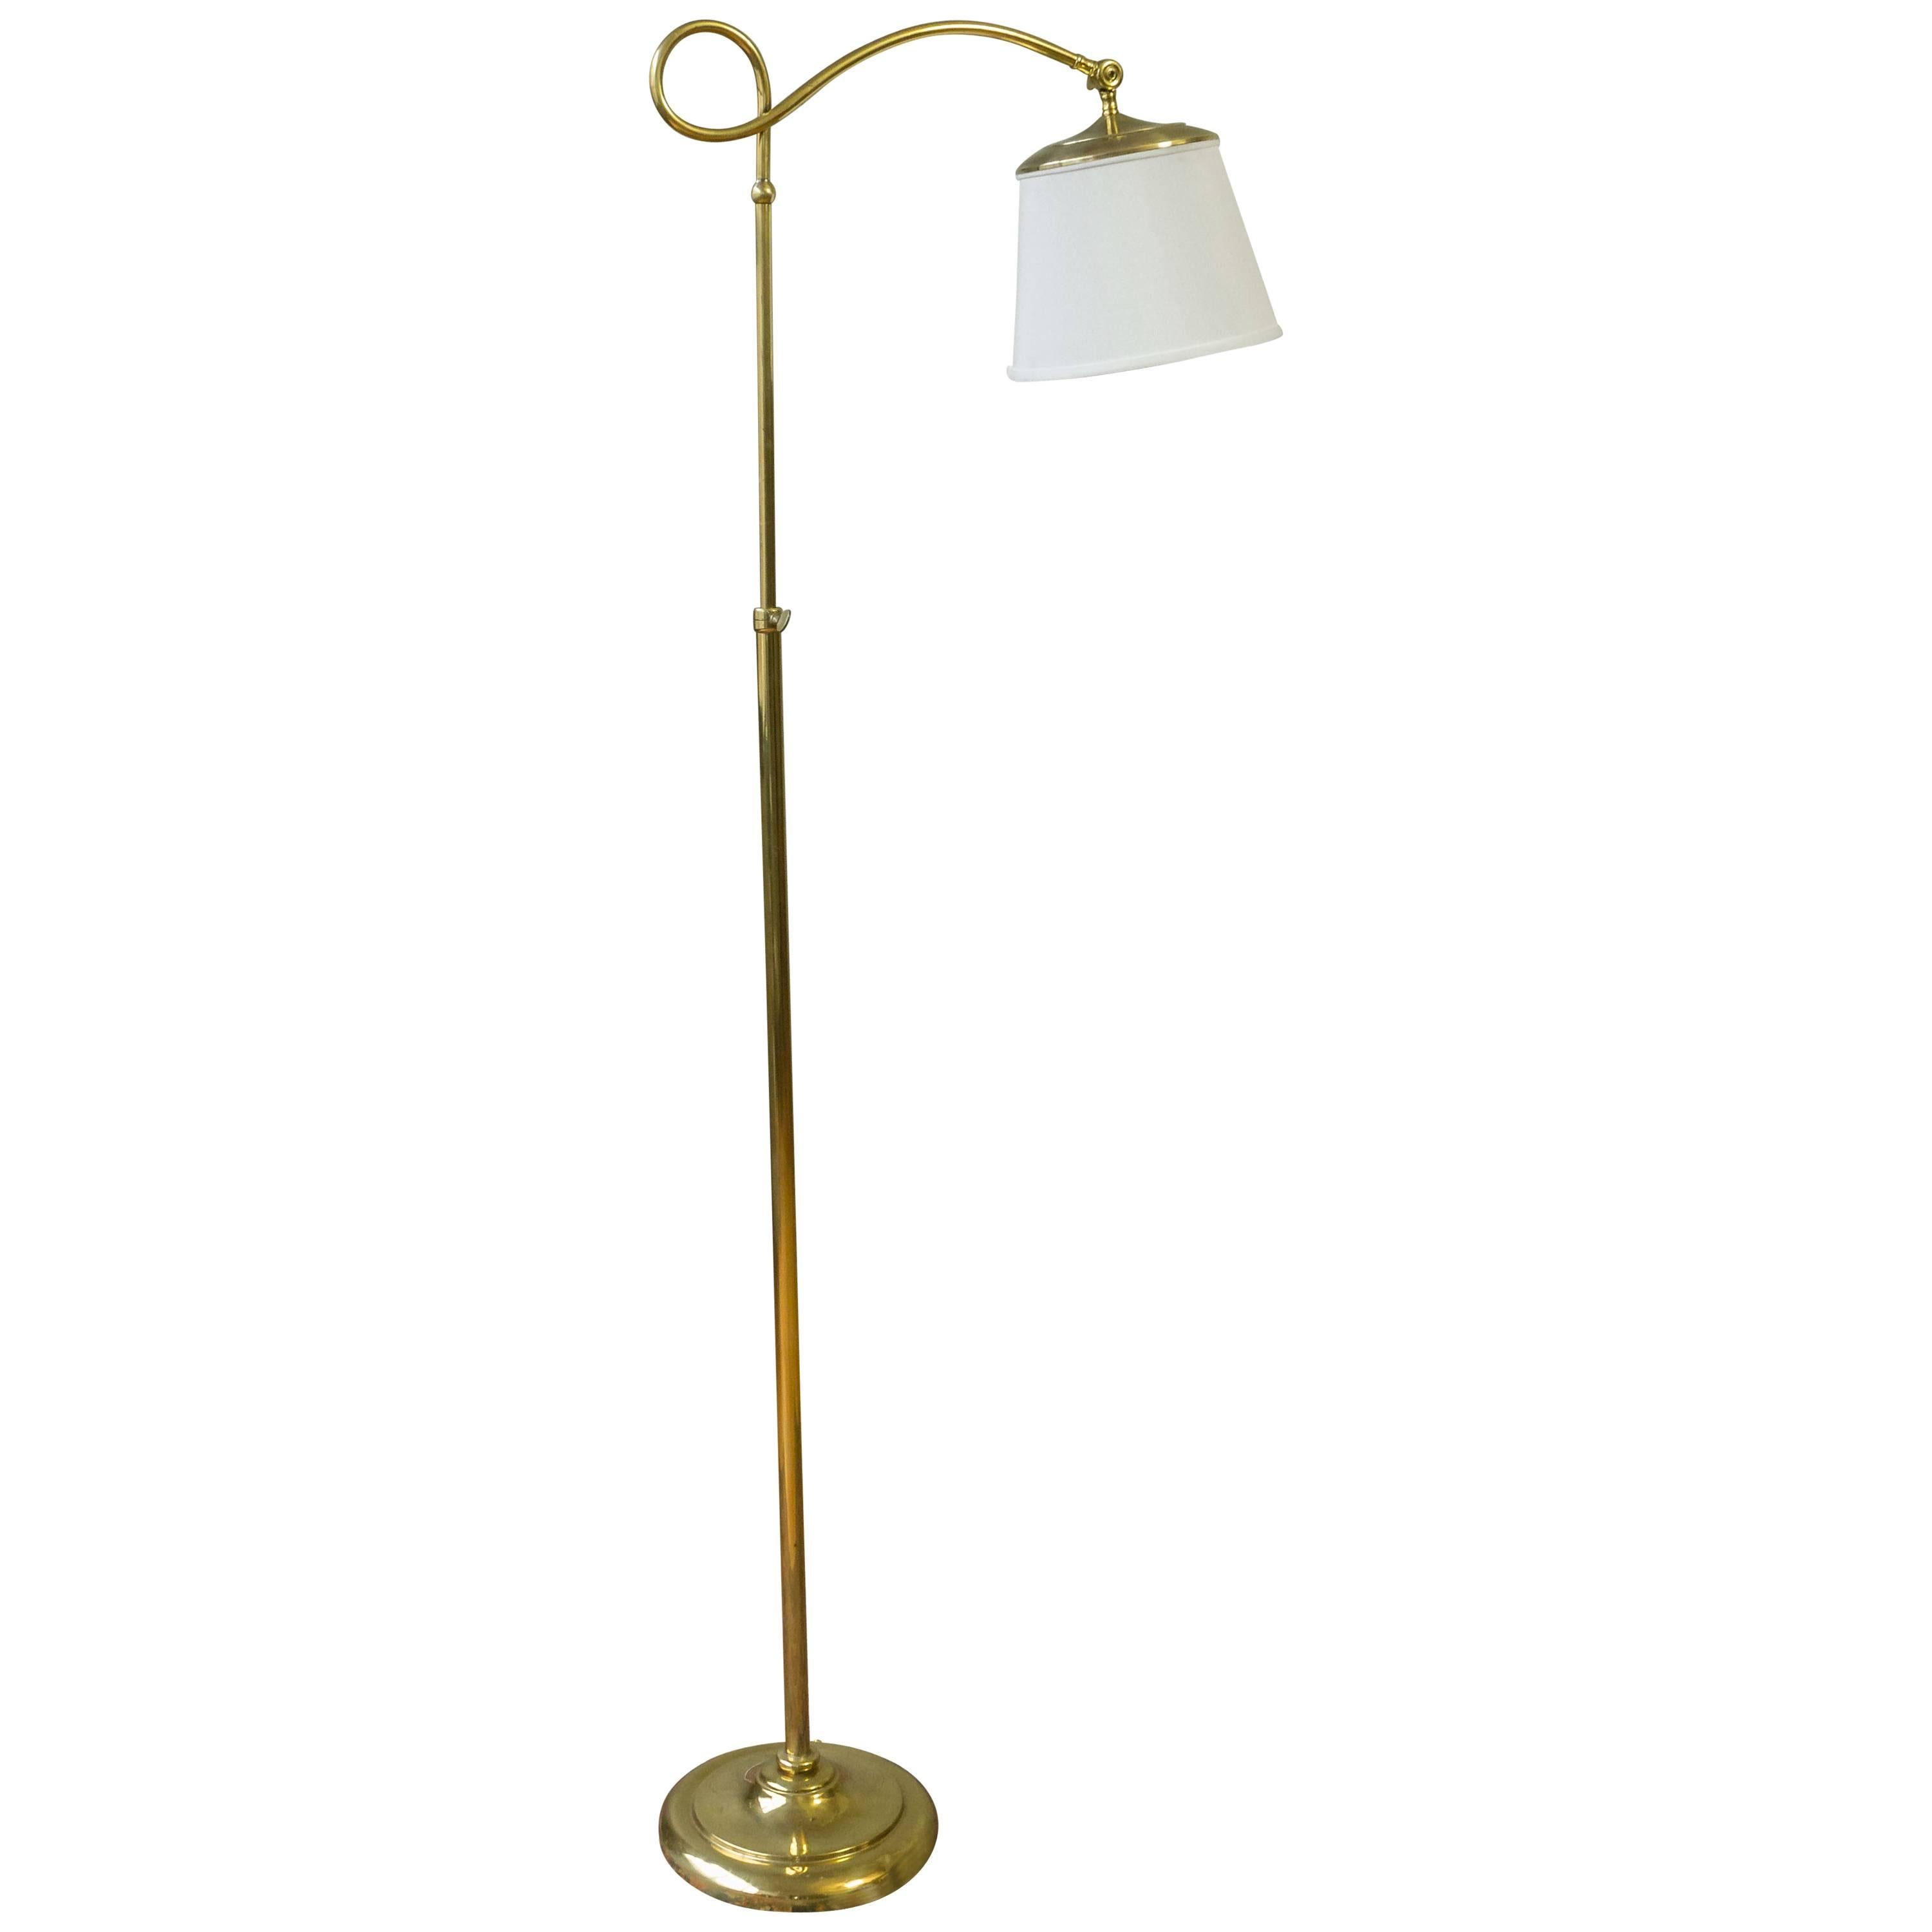 Adjustable Brass Reading Floor Lamp with a Round Base